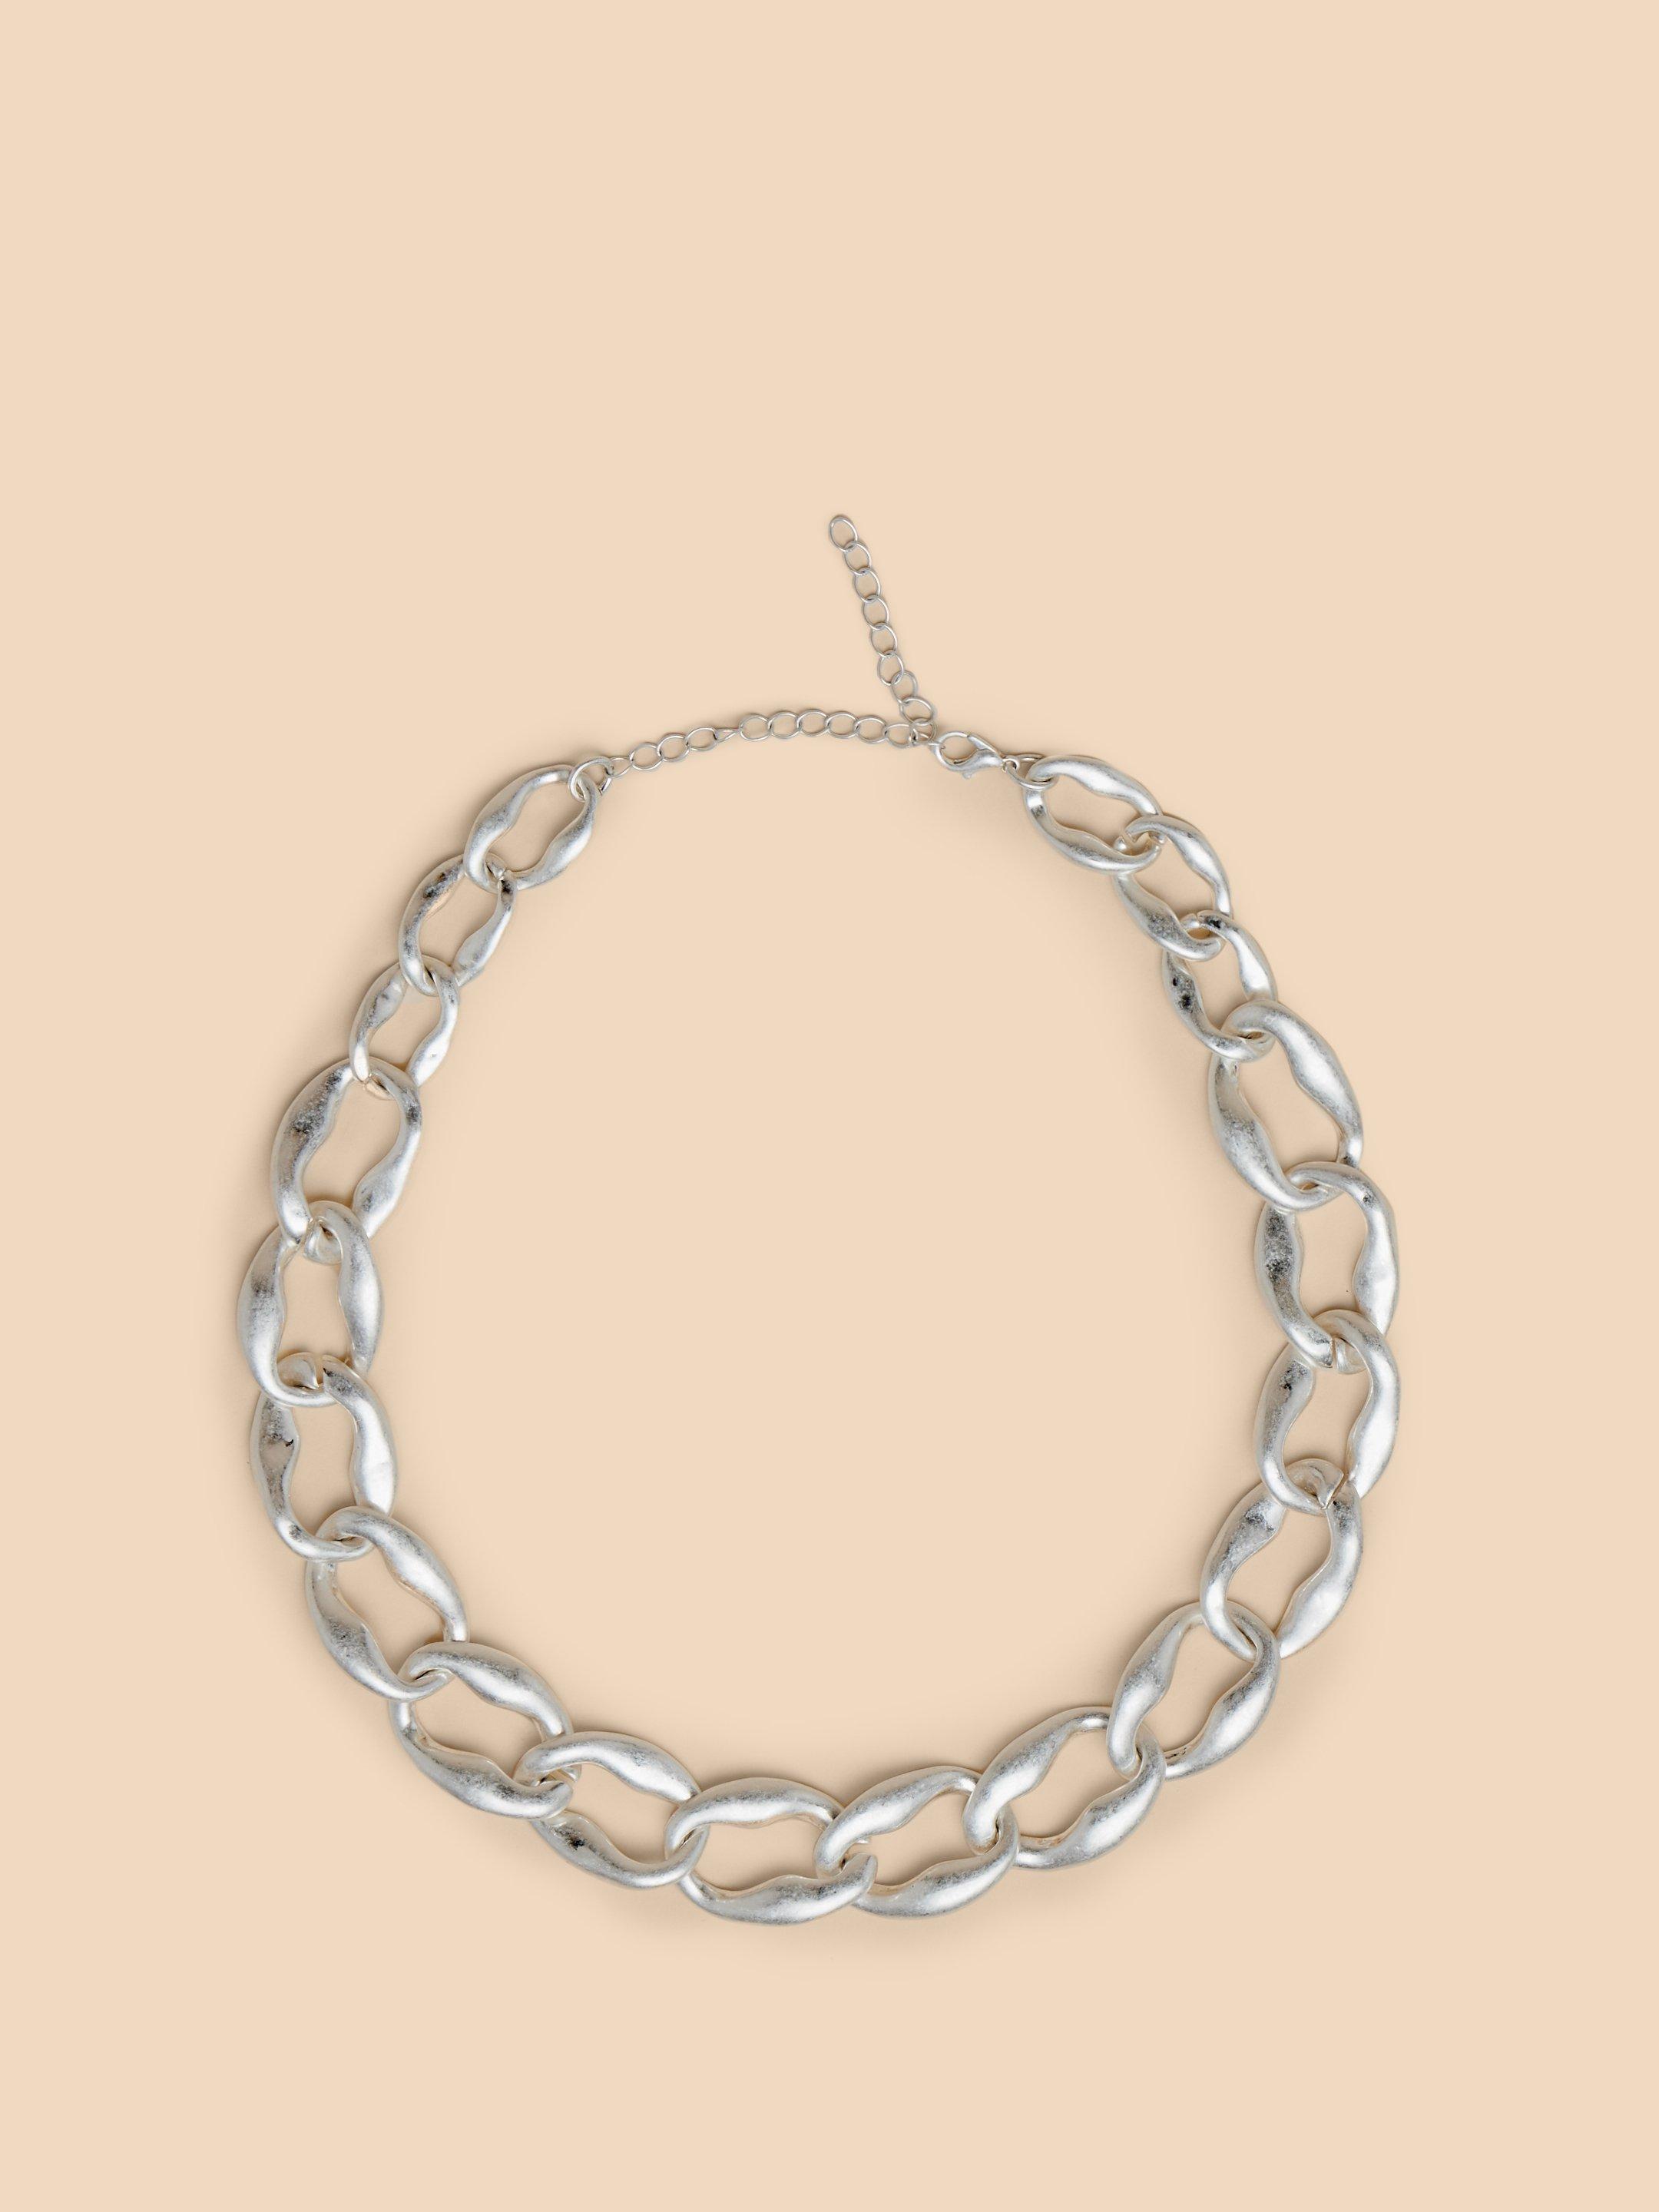 Giacinta Chain Necklace in SLV TN MET - FLAT FRONT